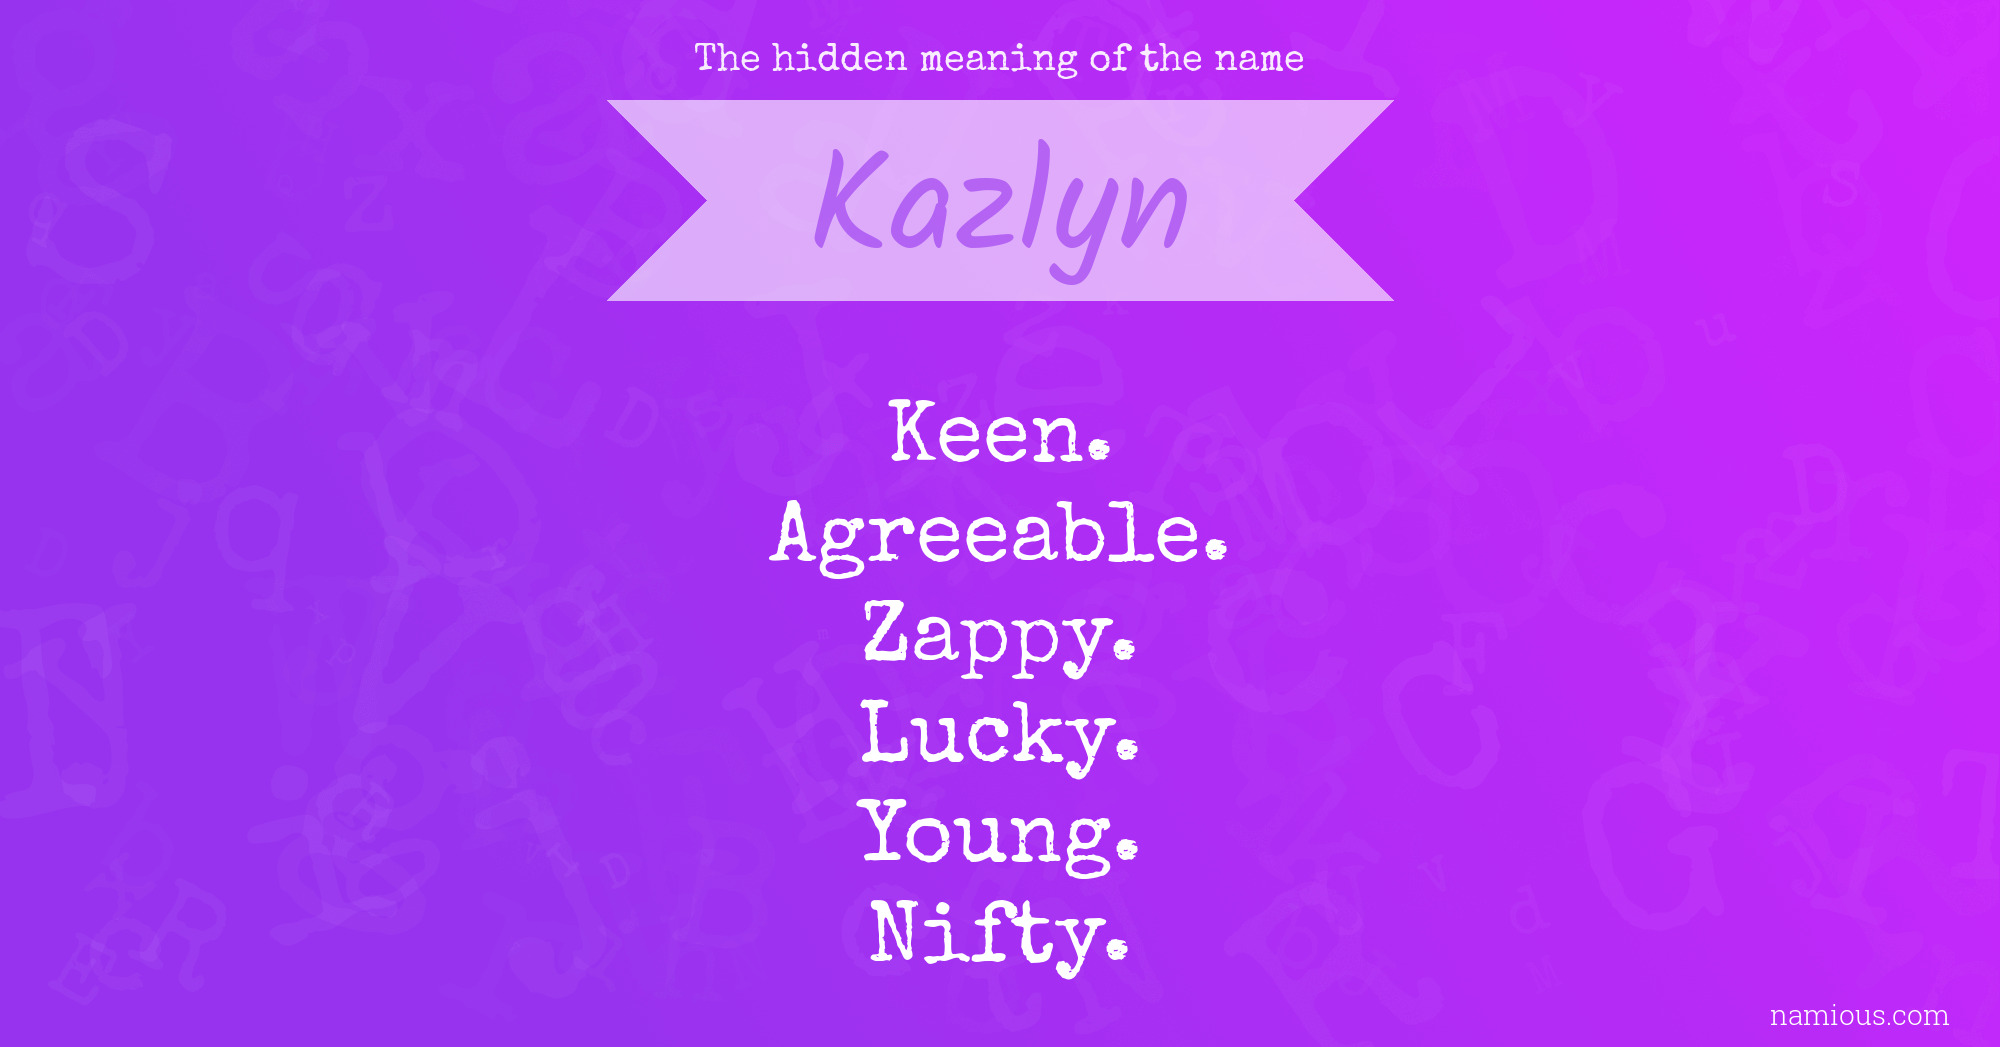 The hidden meaning of the name Kazlyn